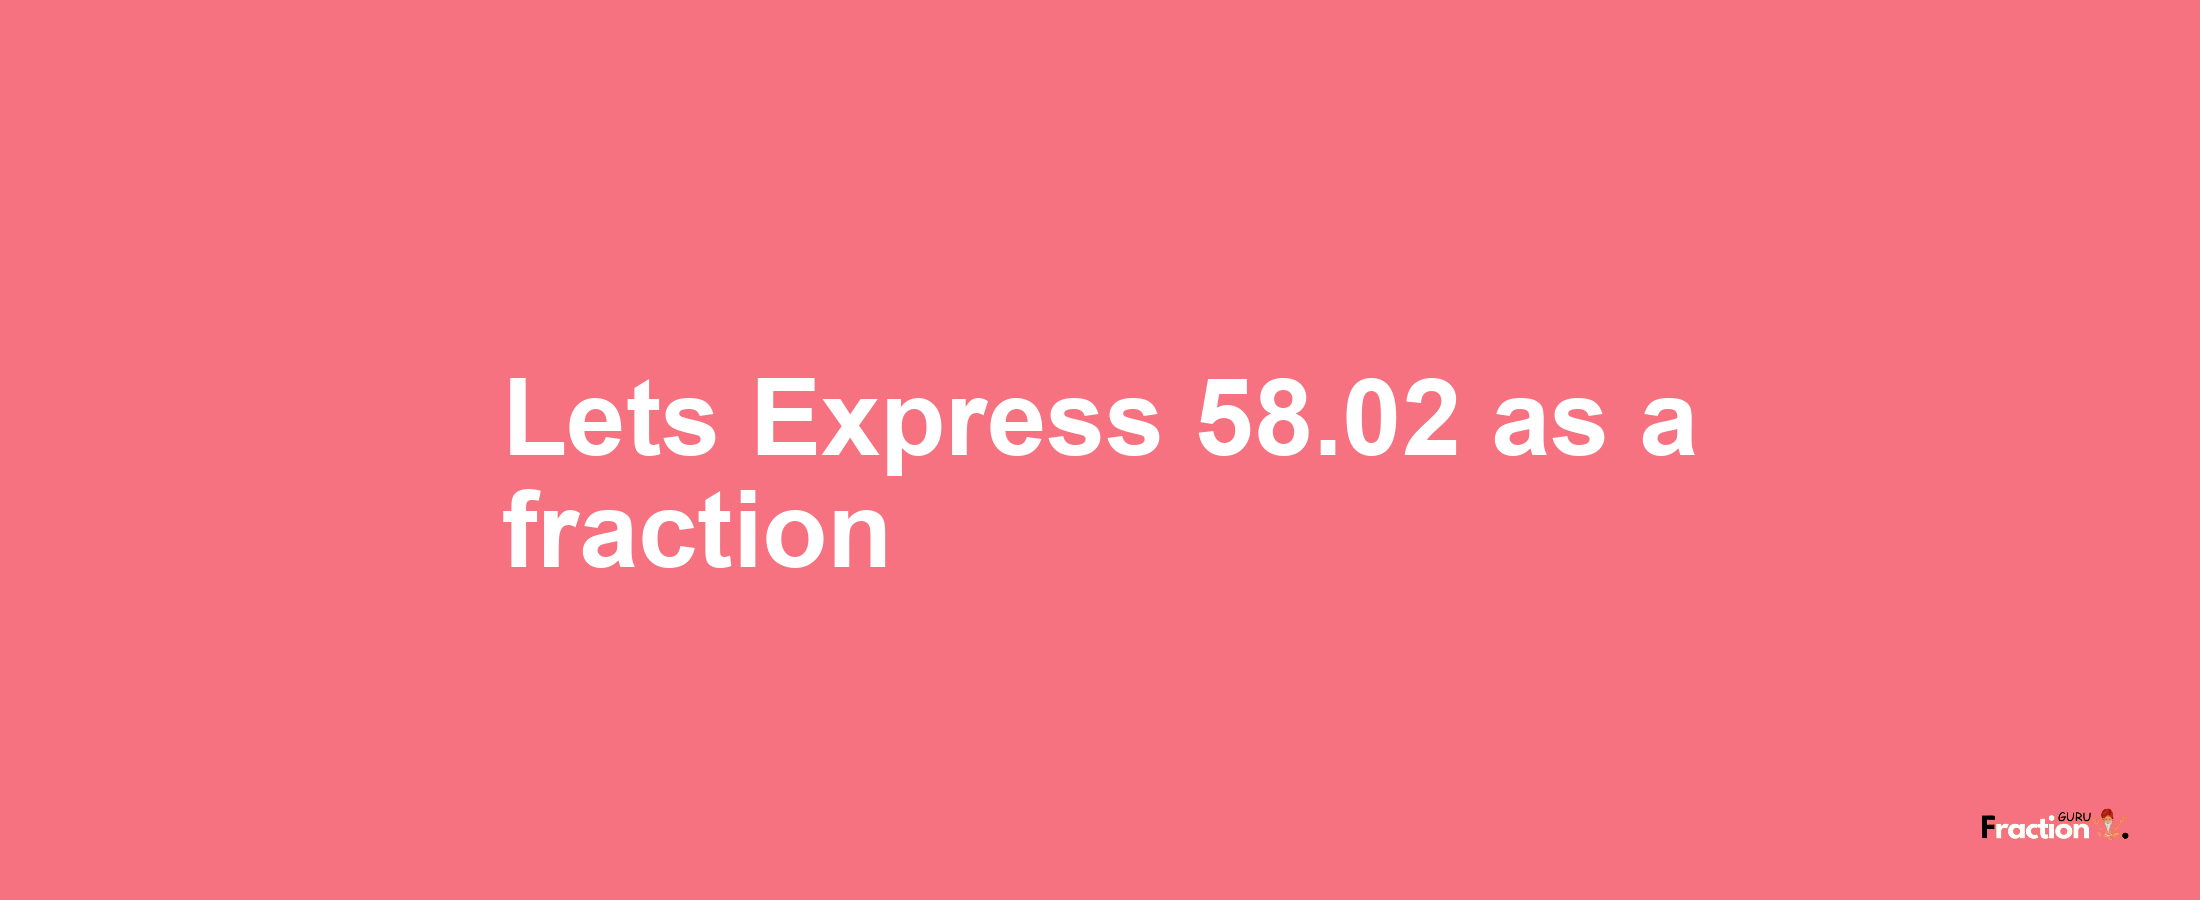 Lets Express 58.02 as afraction